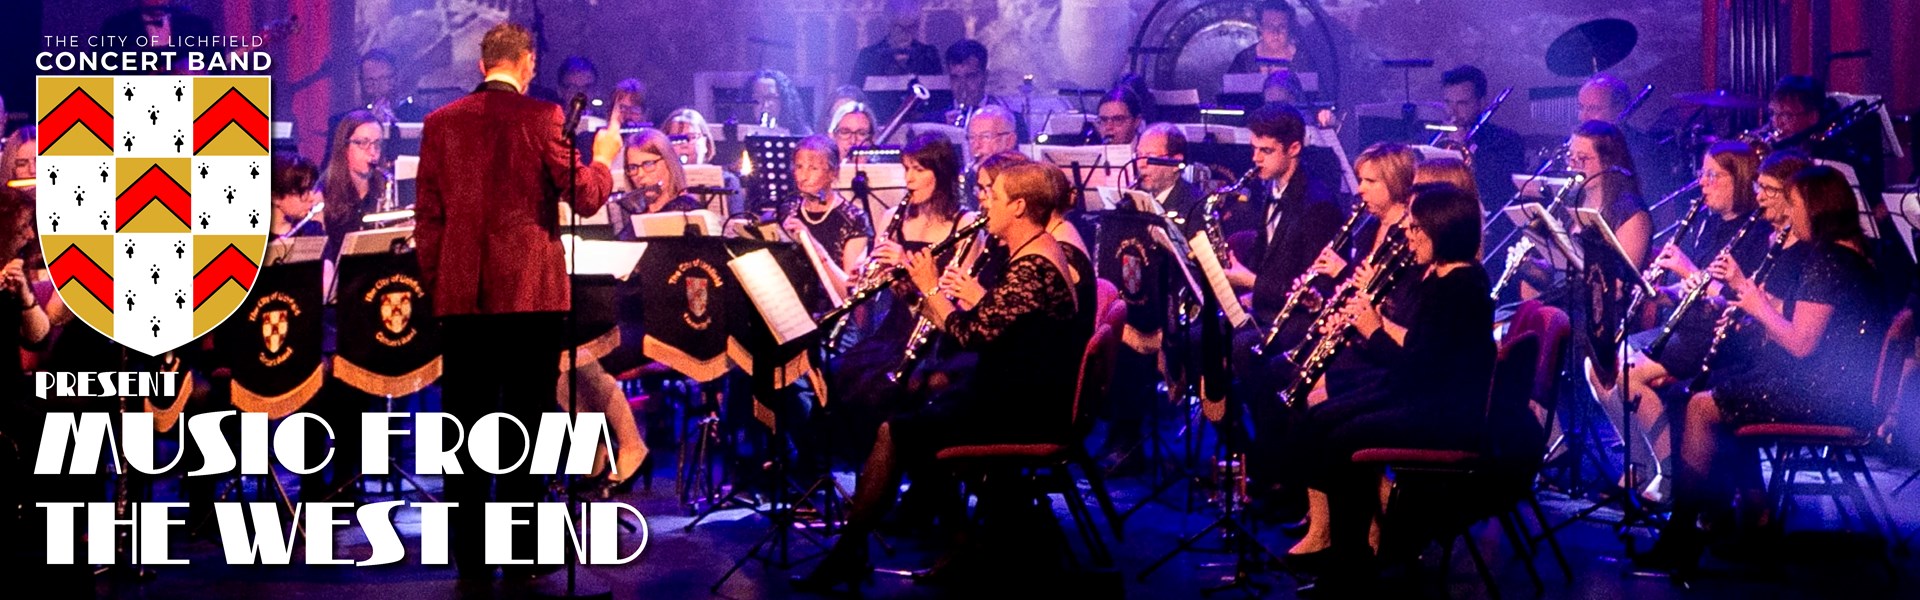 The City of Lichfield Concert Band presents an Afternoon of Musical Hits from the West End